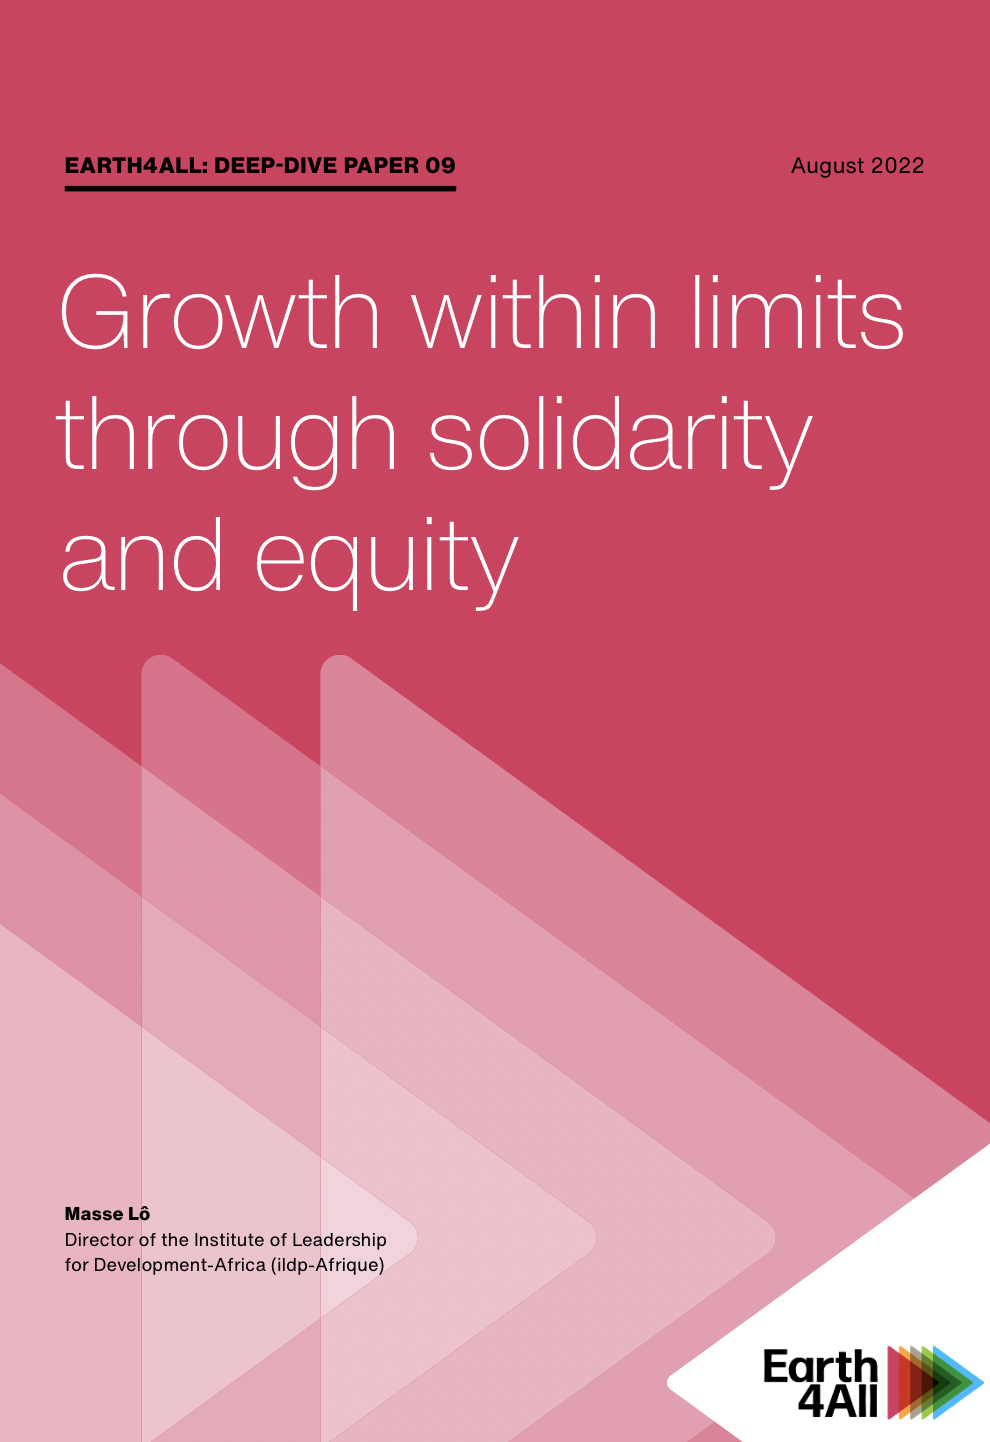 Growth within limits through solidarity and equity